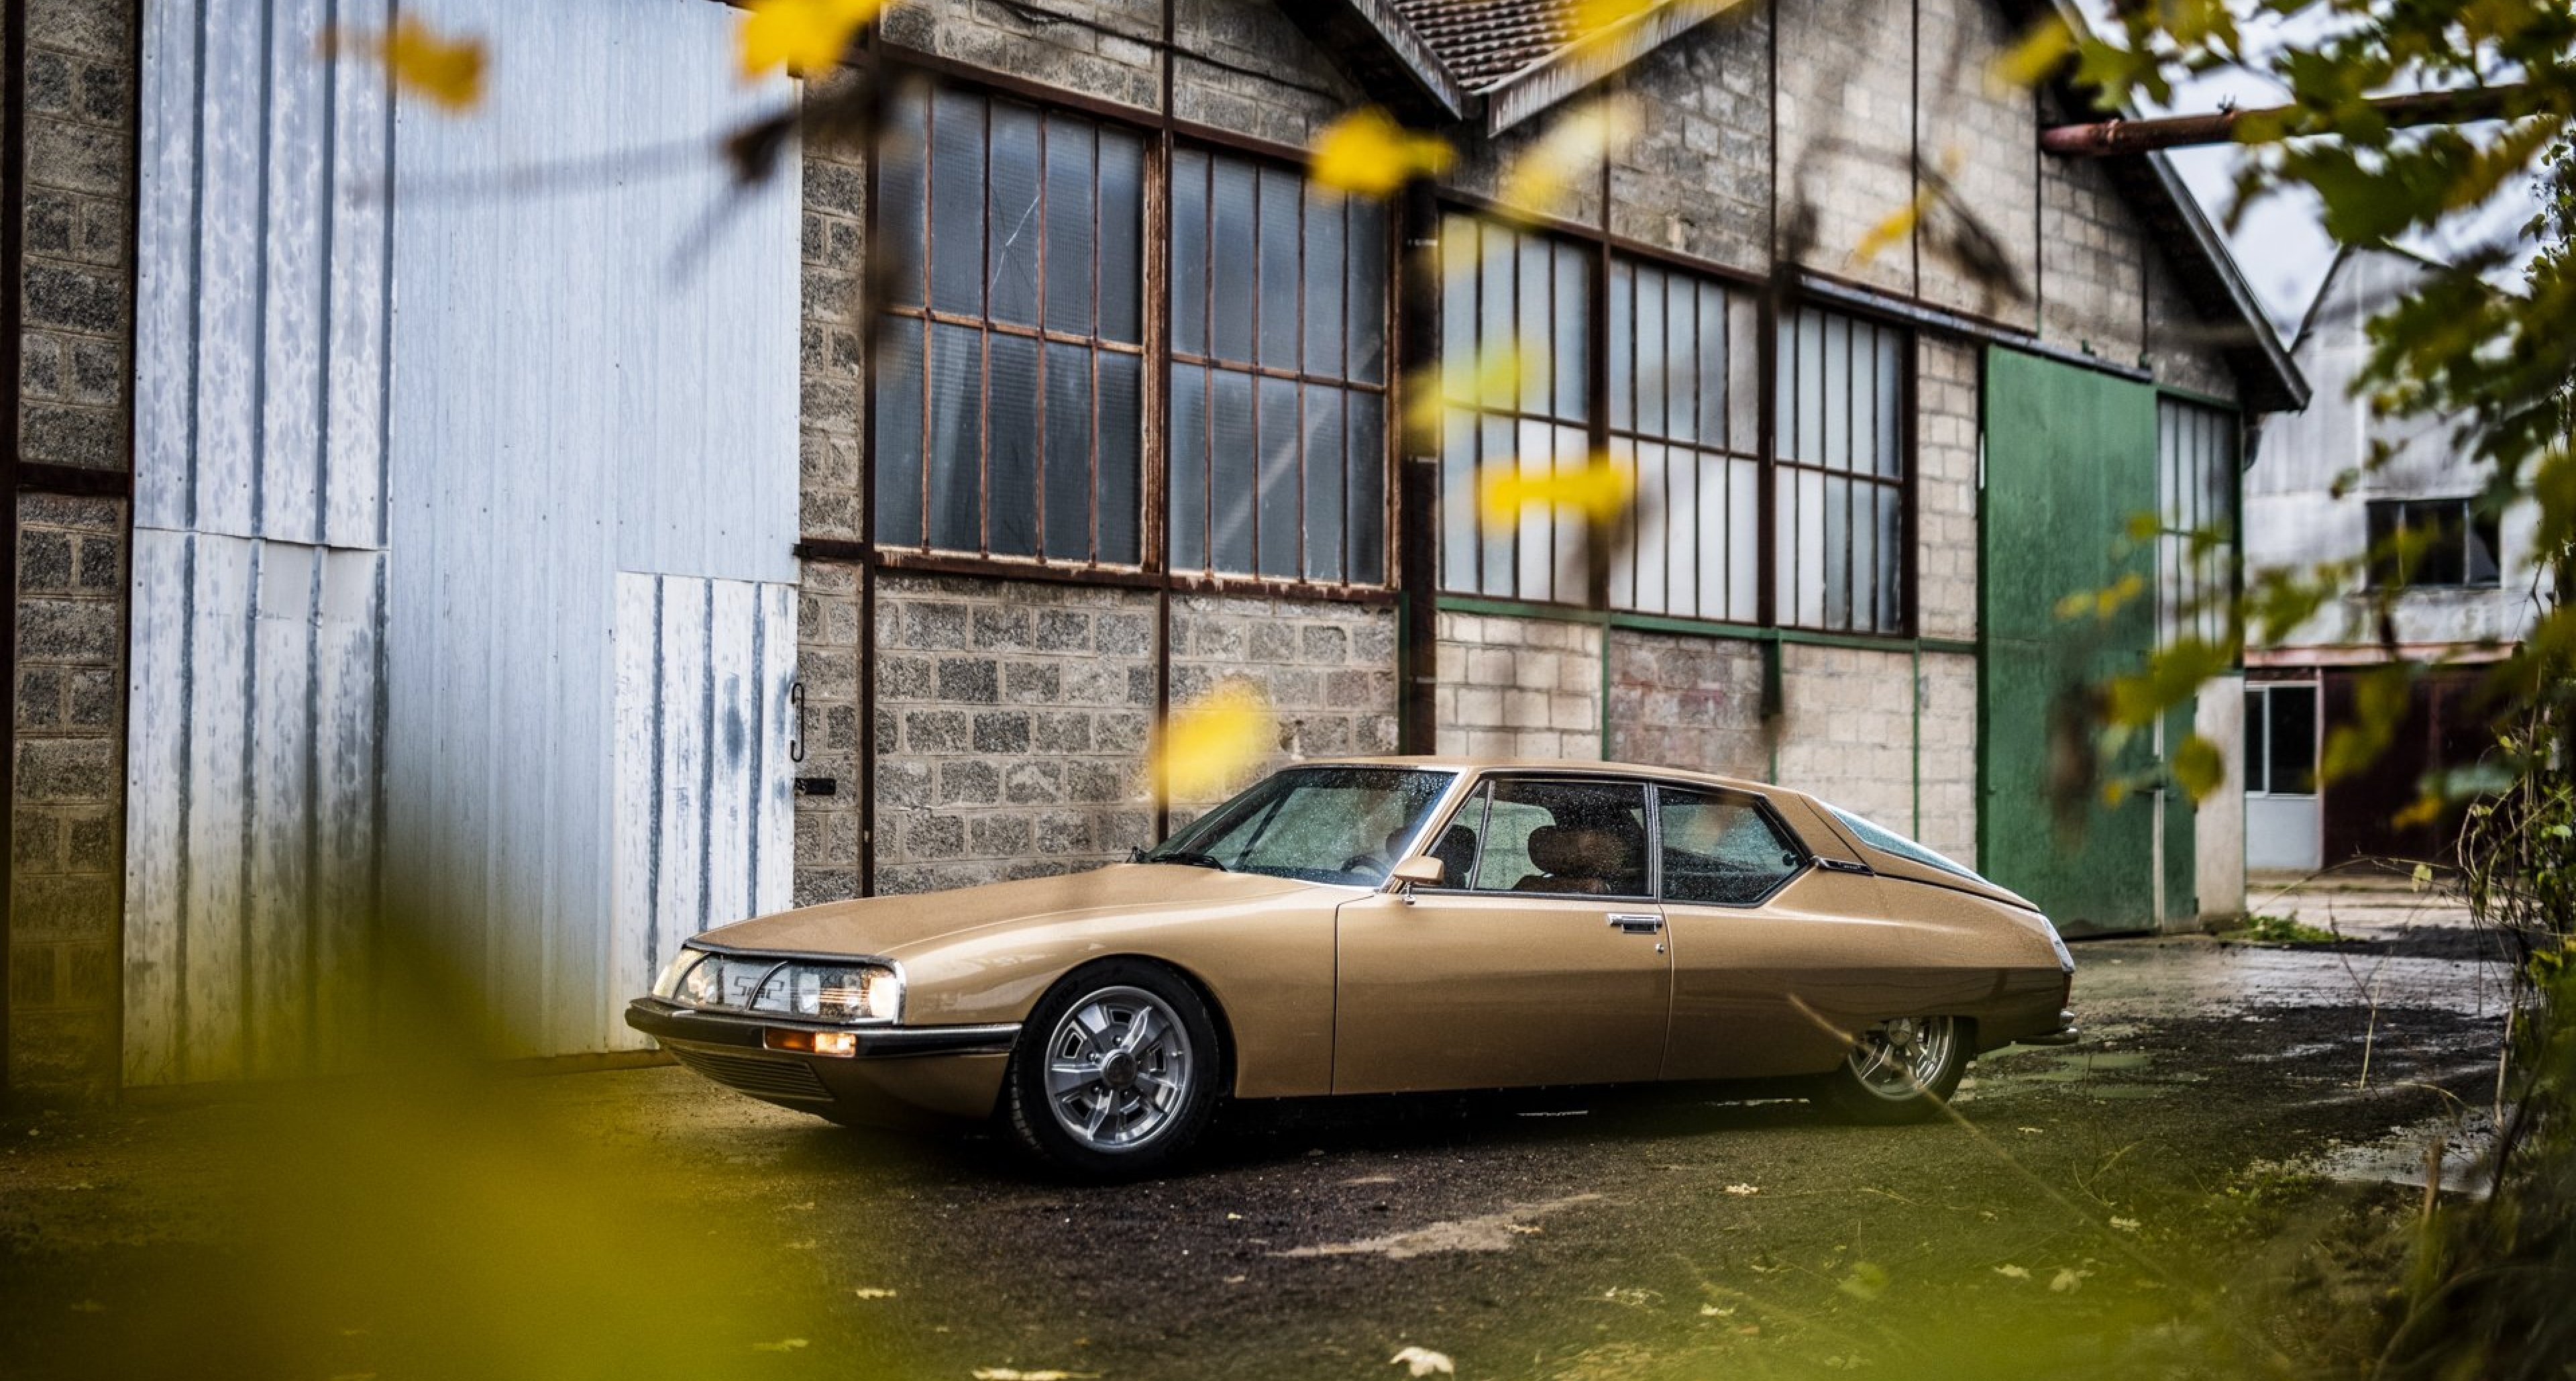 This Citroen Sm Restomod Is A Modern Day Concorde For The Road Classic Driver Magazine